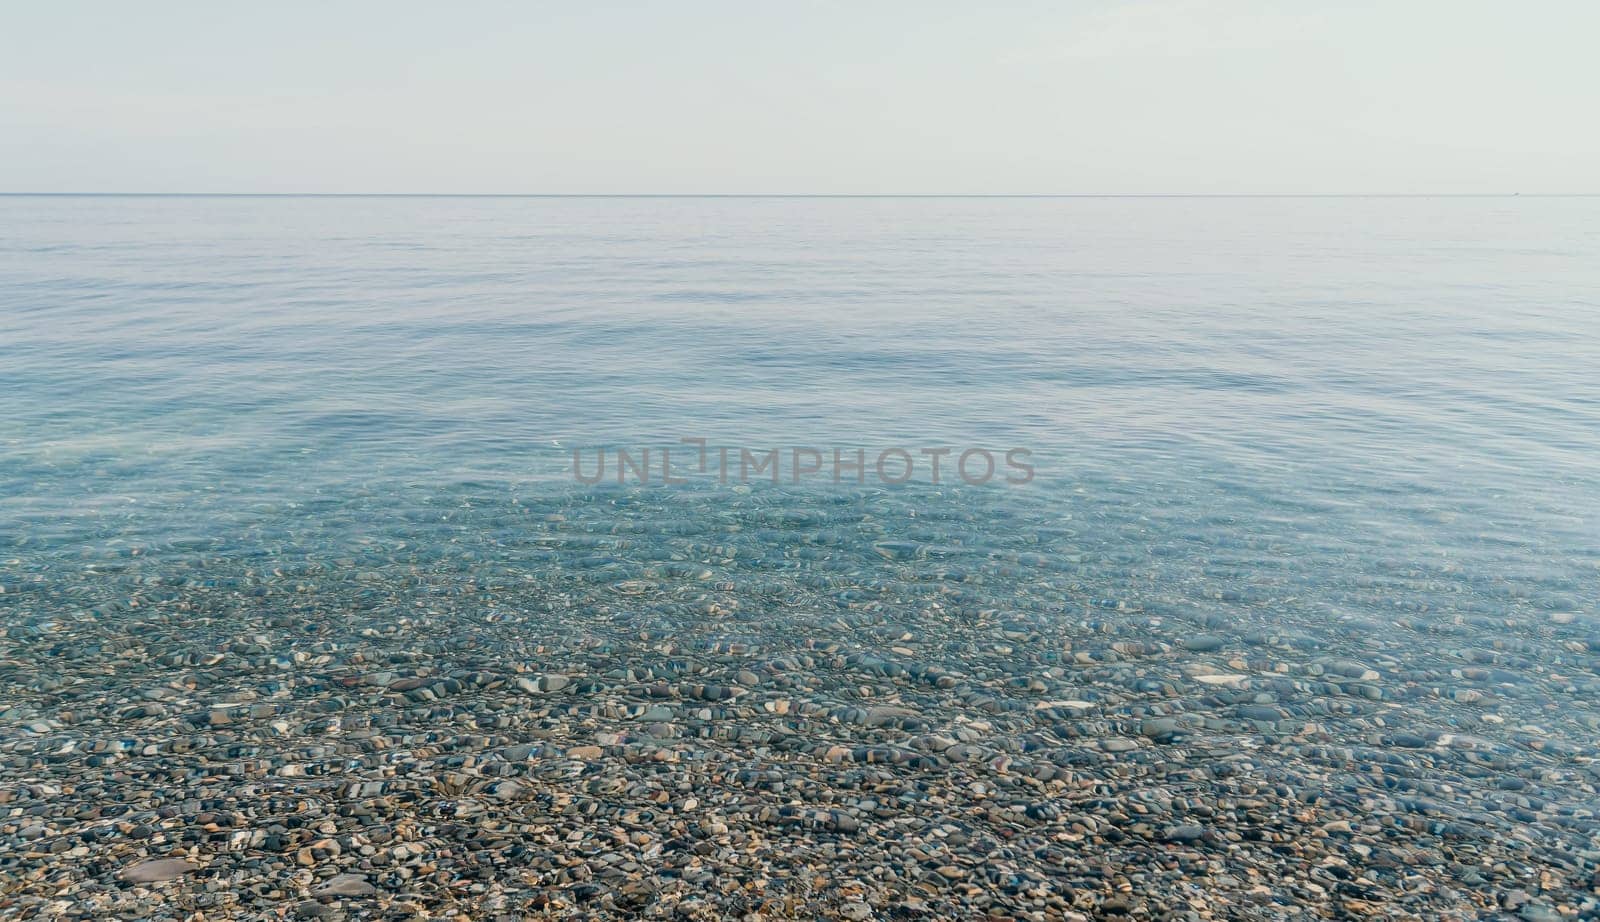 A calm body of water with a few rocks scattered throughout. The water appears to be clear and still, with no visible waves or ripples. The rocks are of various sizes